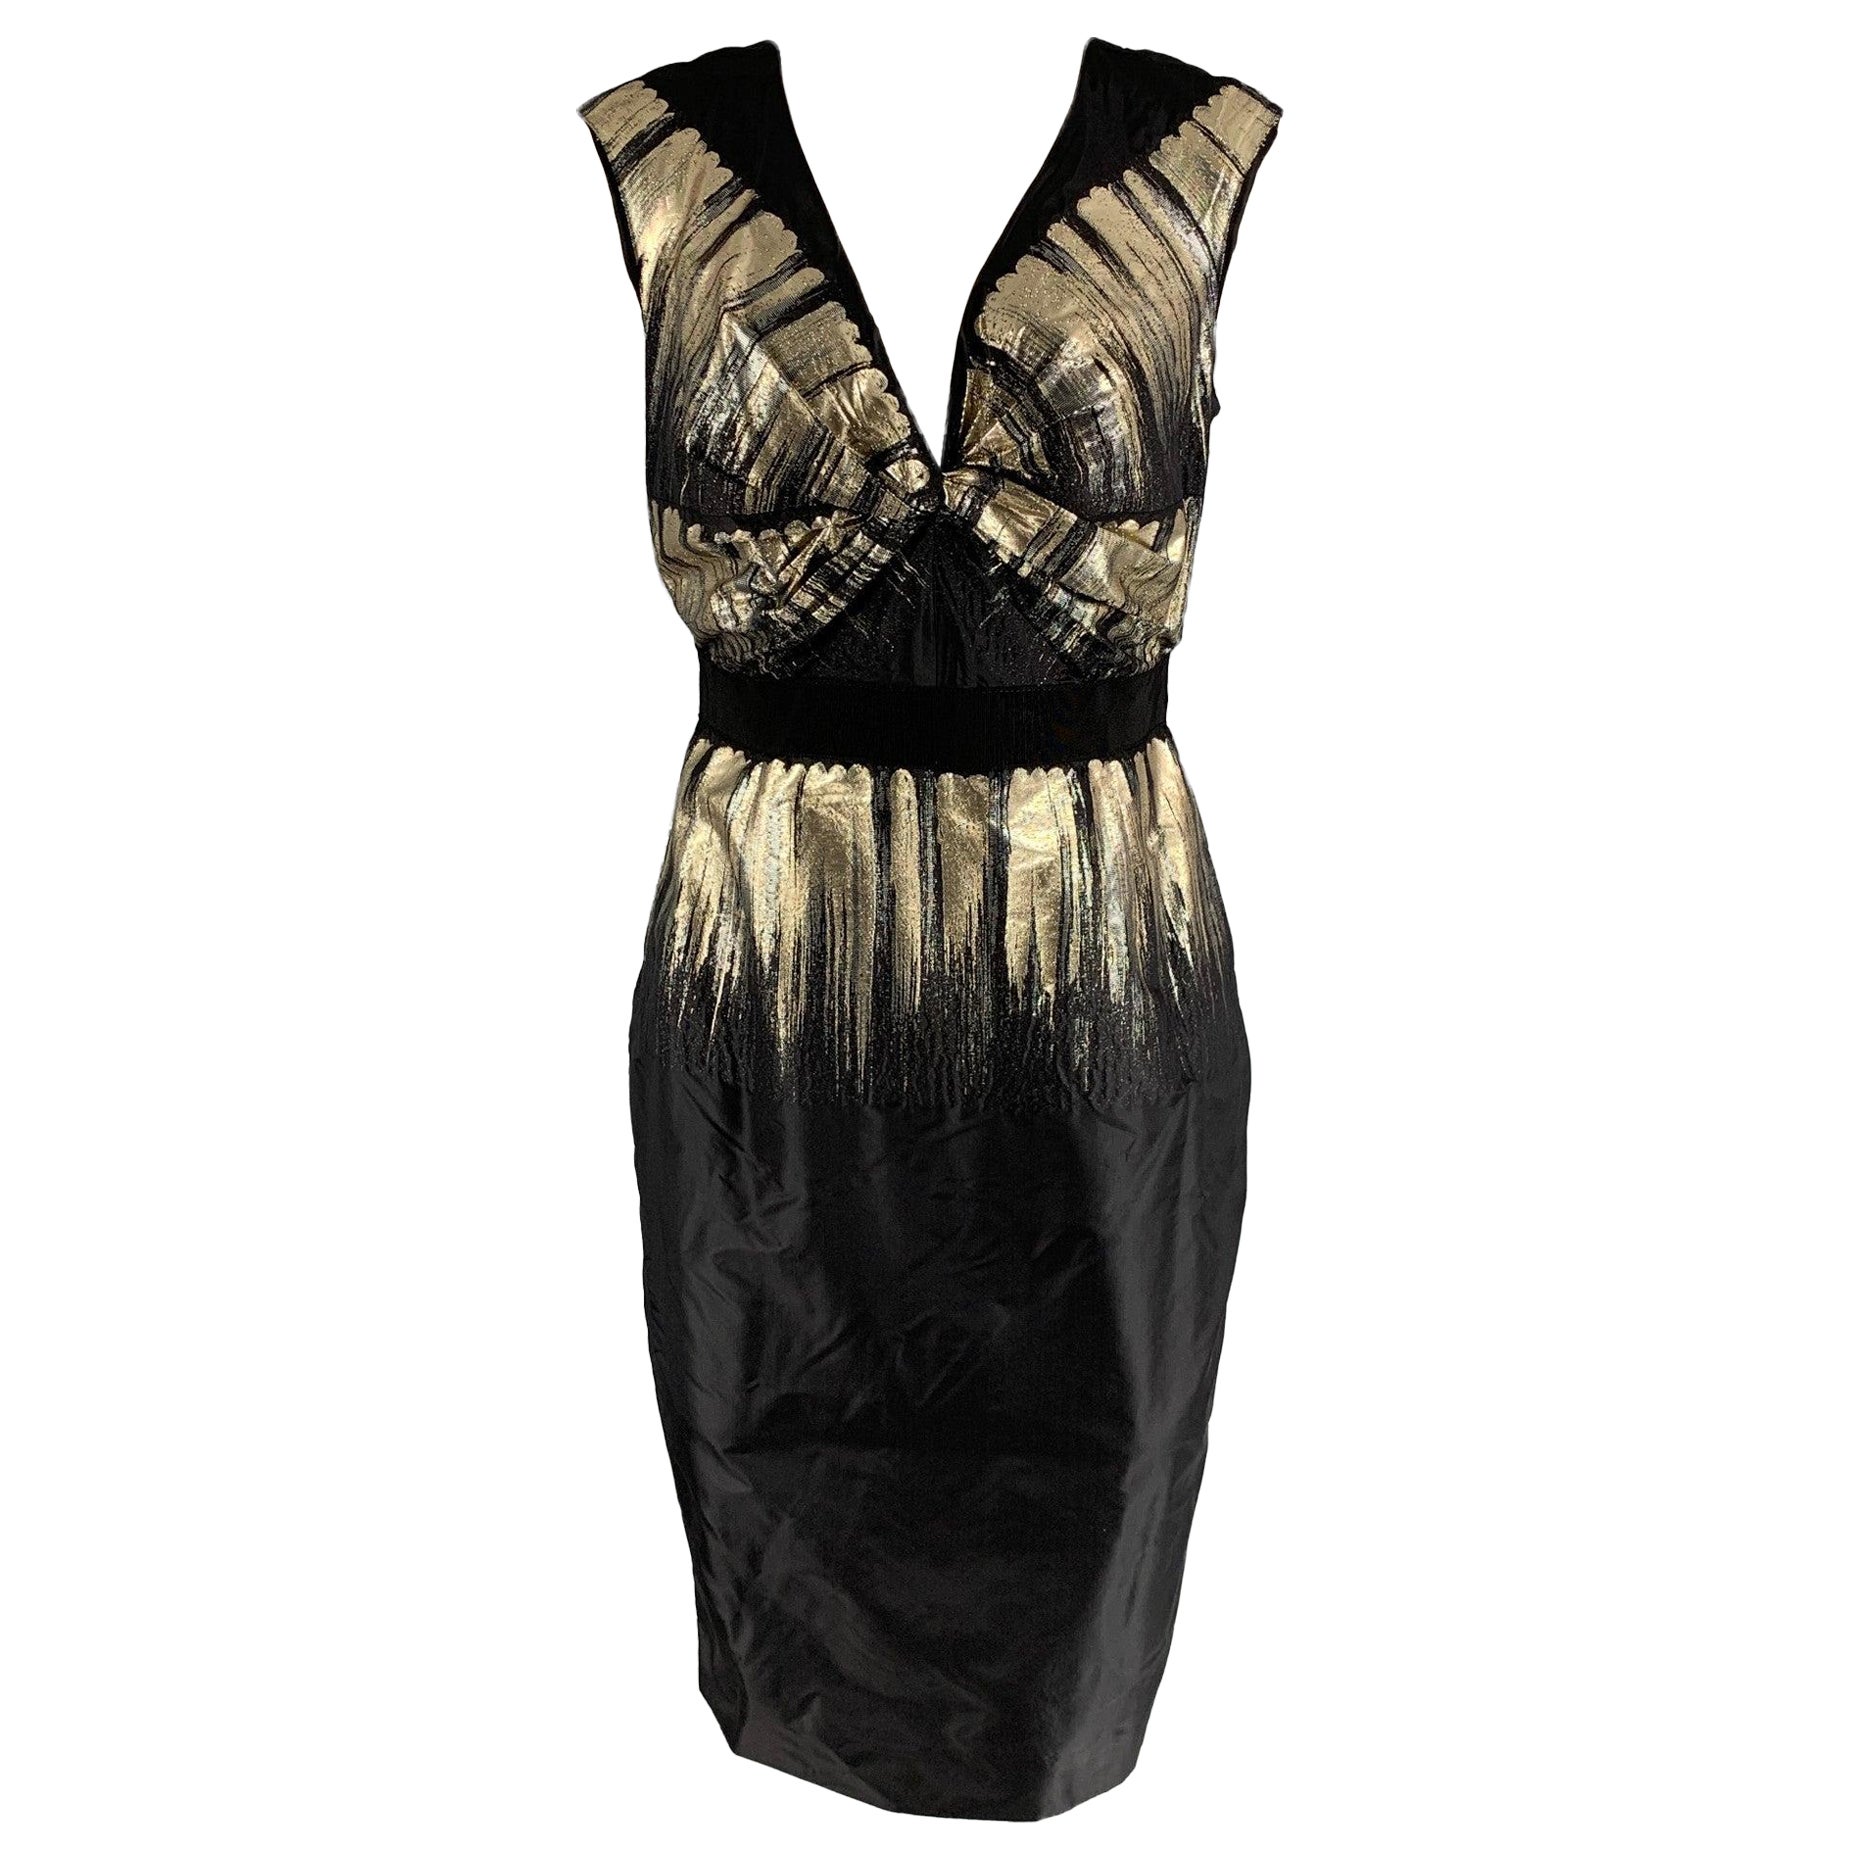 PORTS 1961 Size 4 Black, Gold & Silver Ruched Cocktail Dress